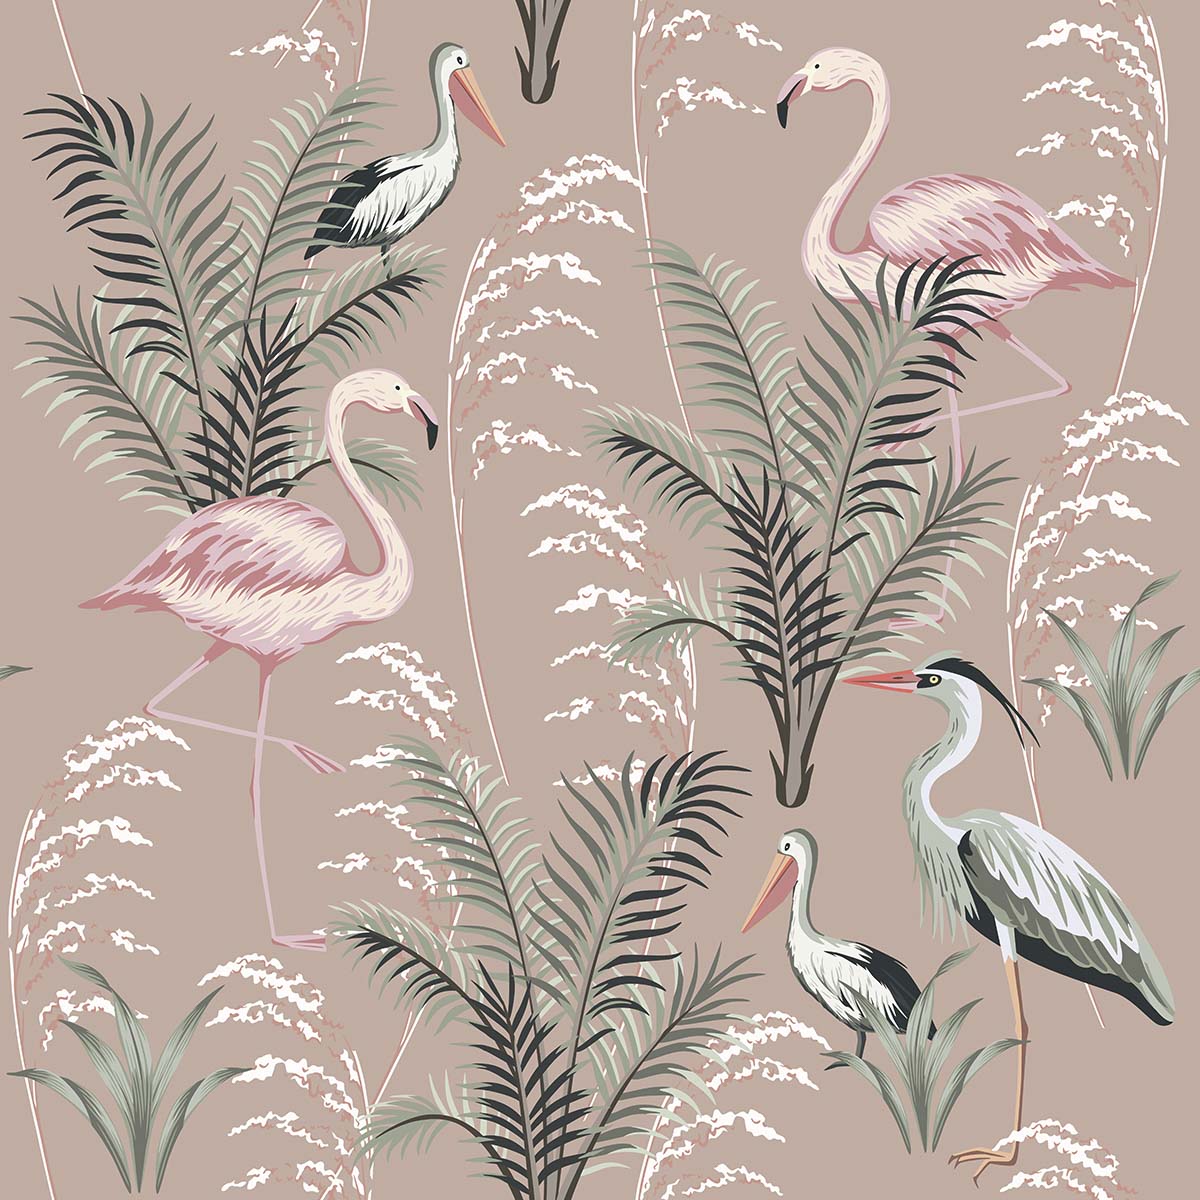 A wallpaper with birds and plants